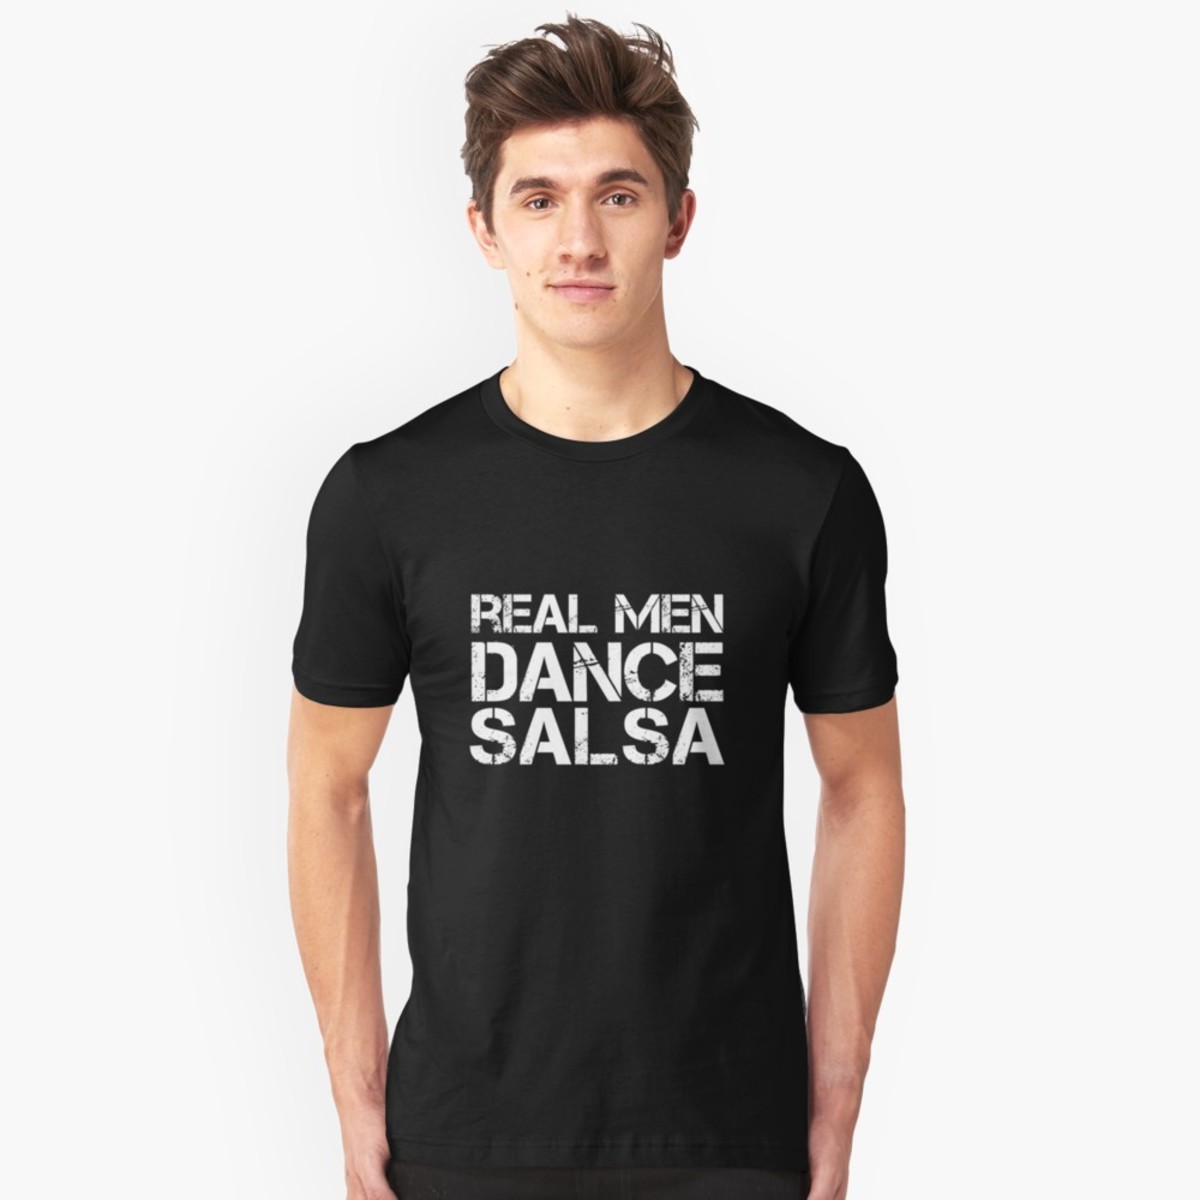 T-shirts with a fun dance quote can be good conversation starters, especially if you are going to a more casual salsa club.